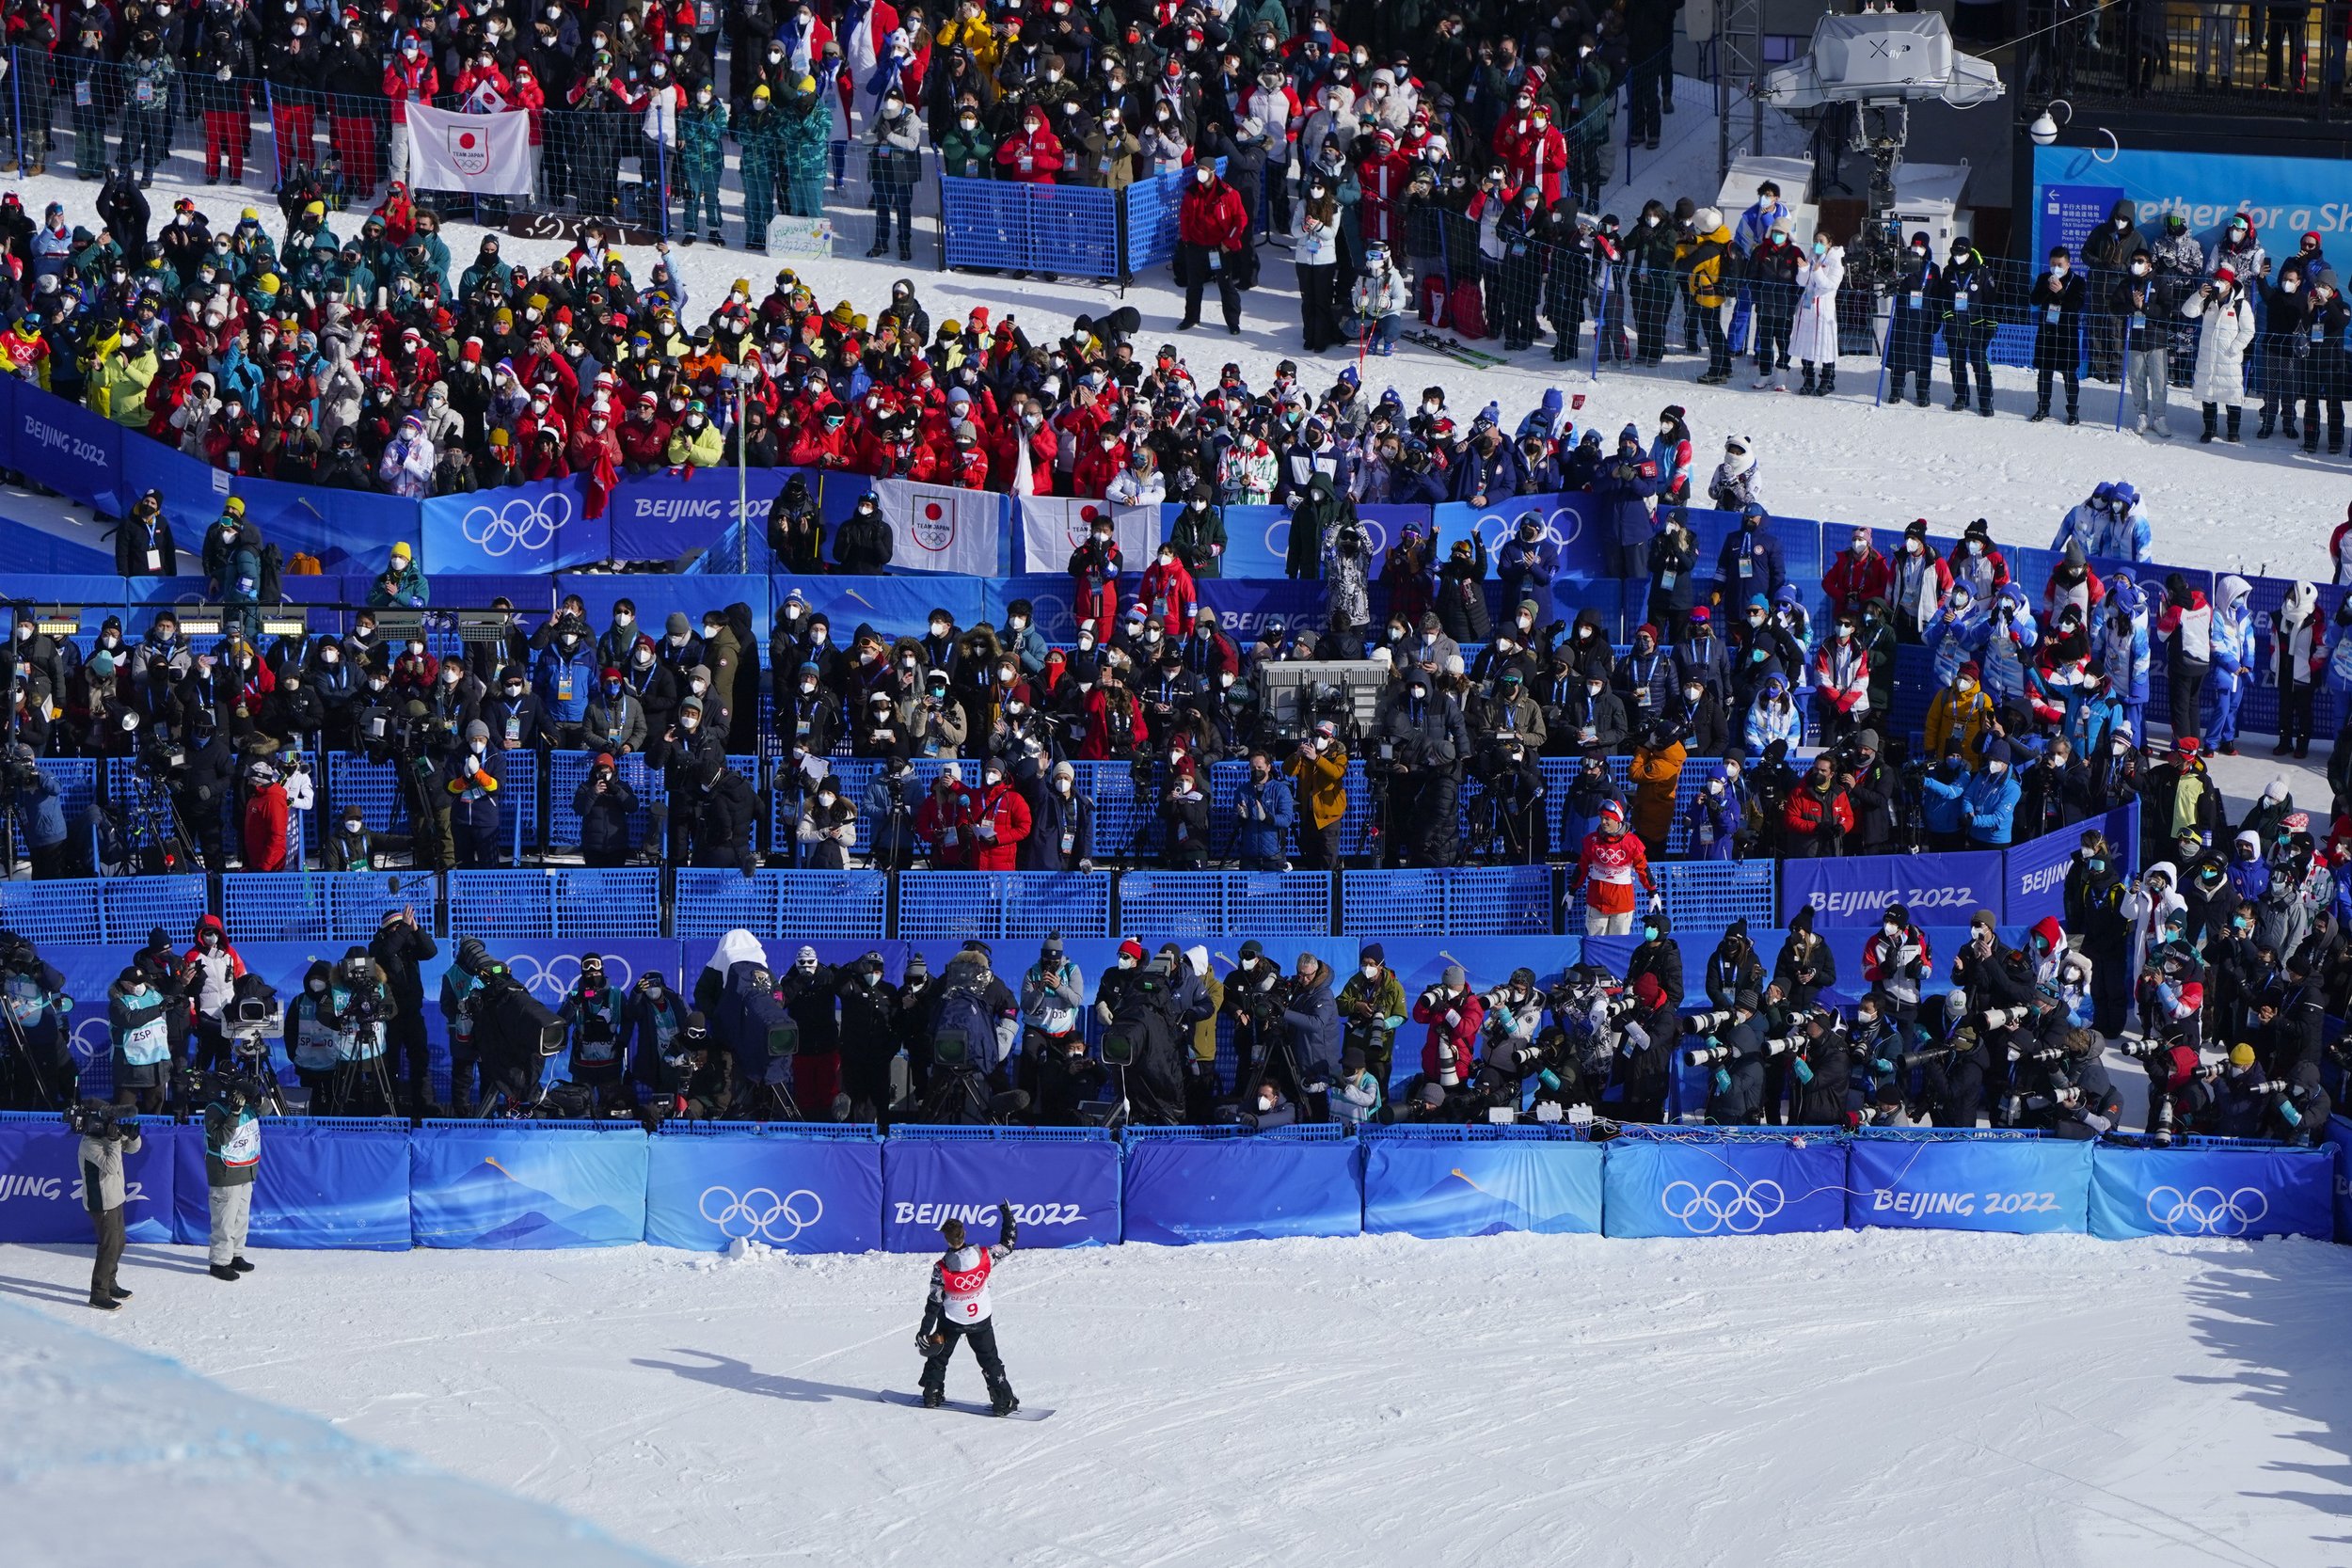  United States' Shaun White waves after competing in the men's halfpipe finals at the 2022 Winter Olympics, Friday, Feb. 11, 2022, in Zhangjiakou, China. (AP Photo/Gregory Bull) 